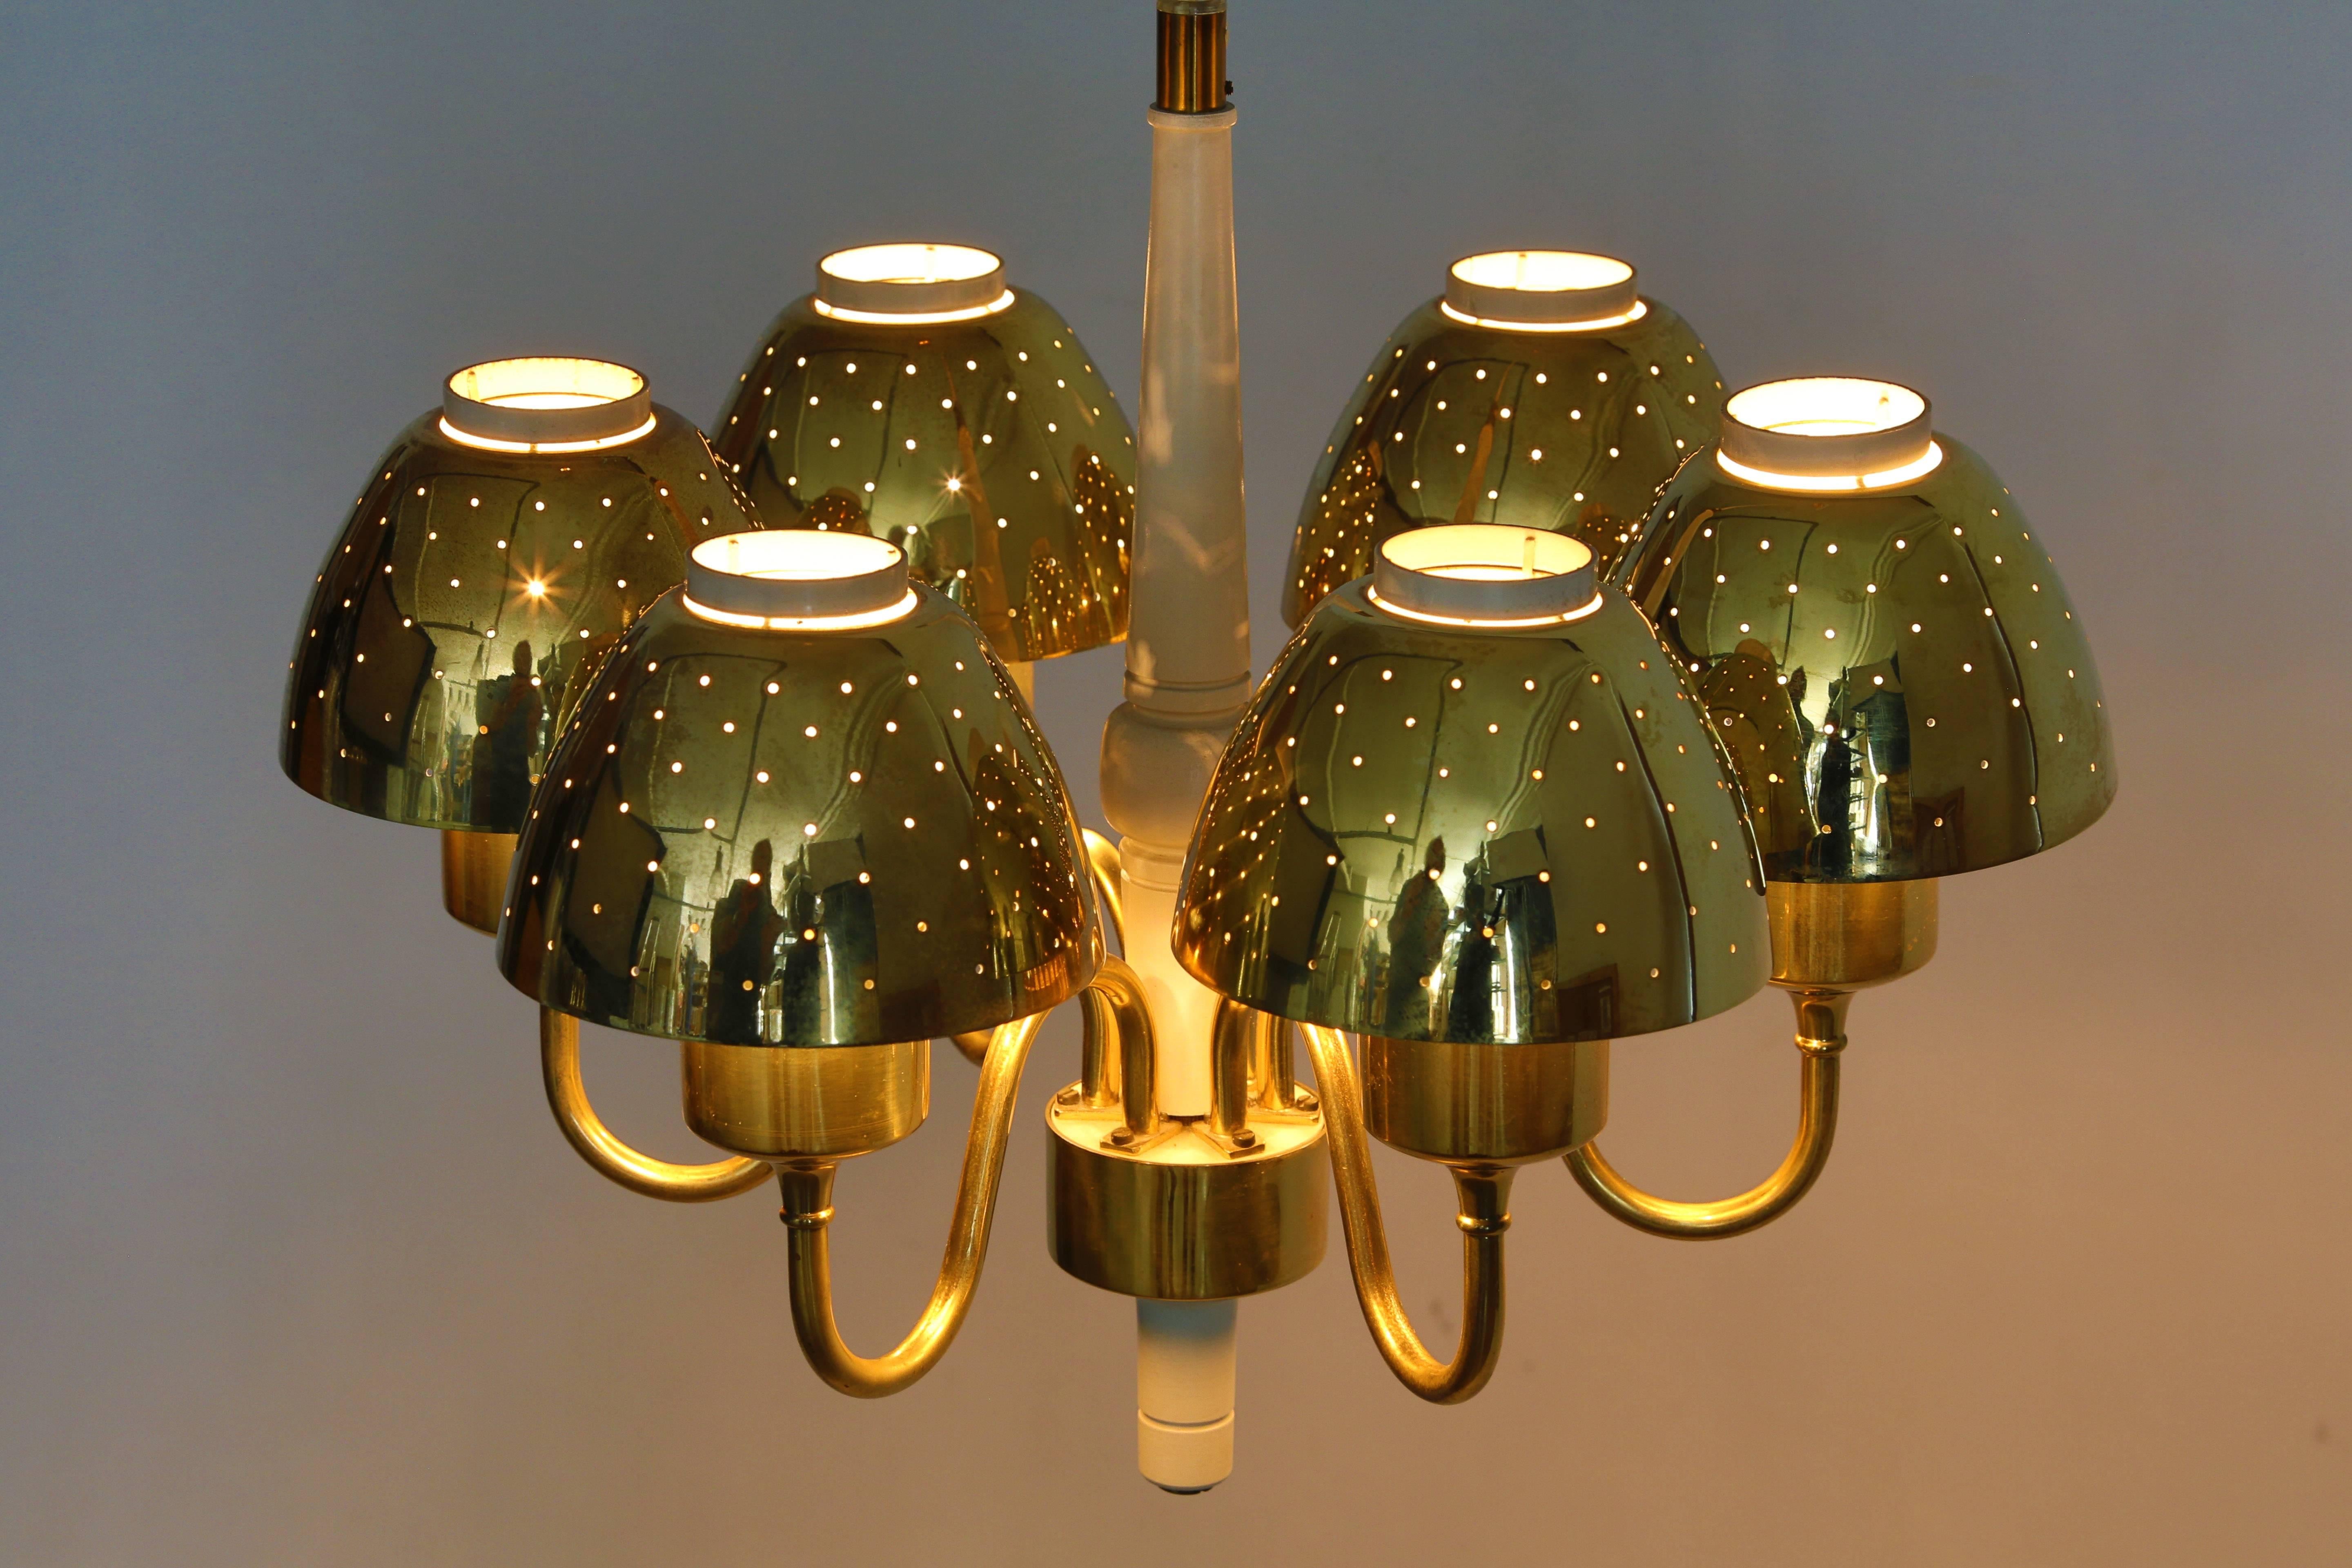 HANS AGNE JAKOBSSON brass pendant. A pendant designed by Hans Agne Jakobsson for Markaryd, Sweden. The lamp has six brass chalices. The chalices have lots of holes to make diffuse and romantic light. The center is of white painted wood. A real